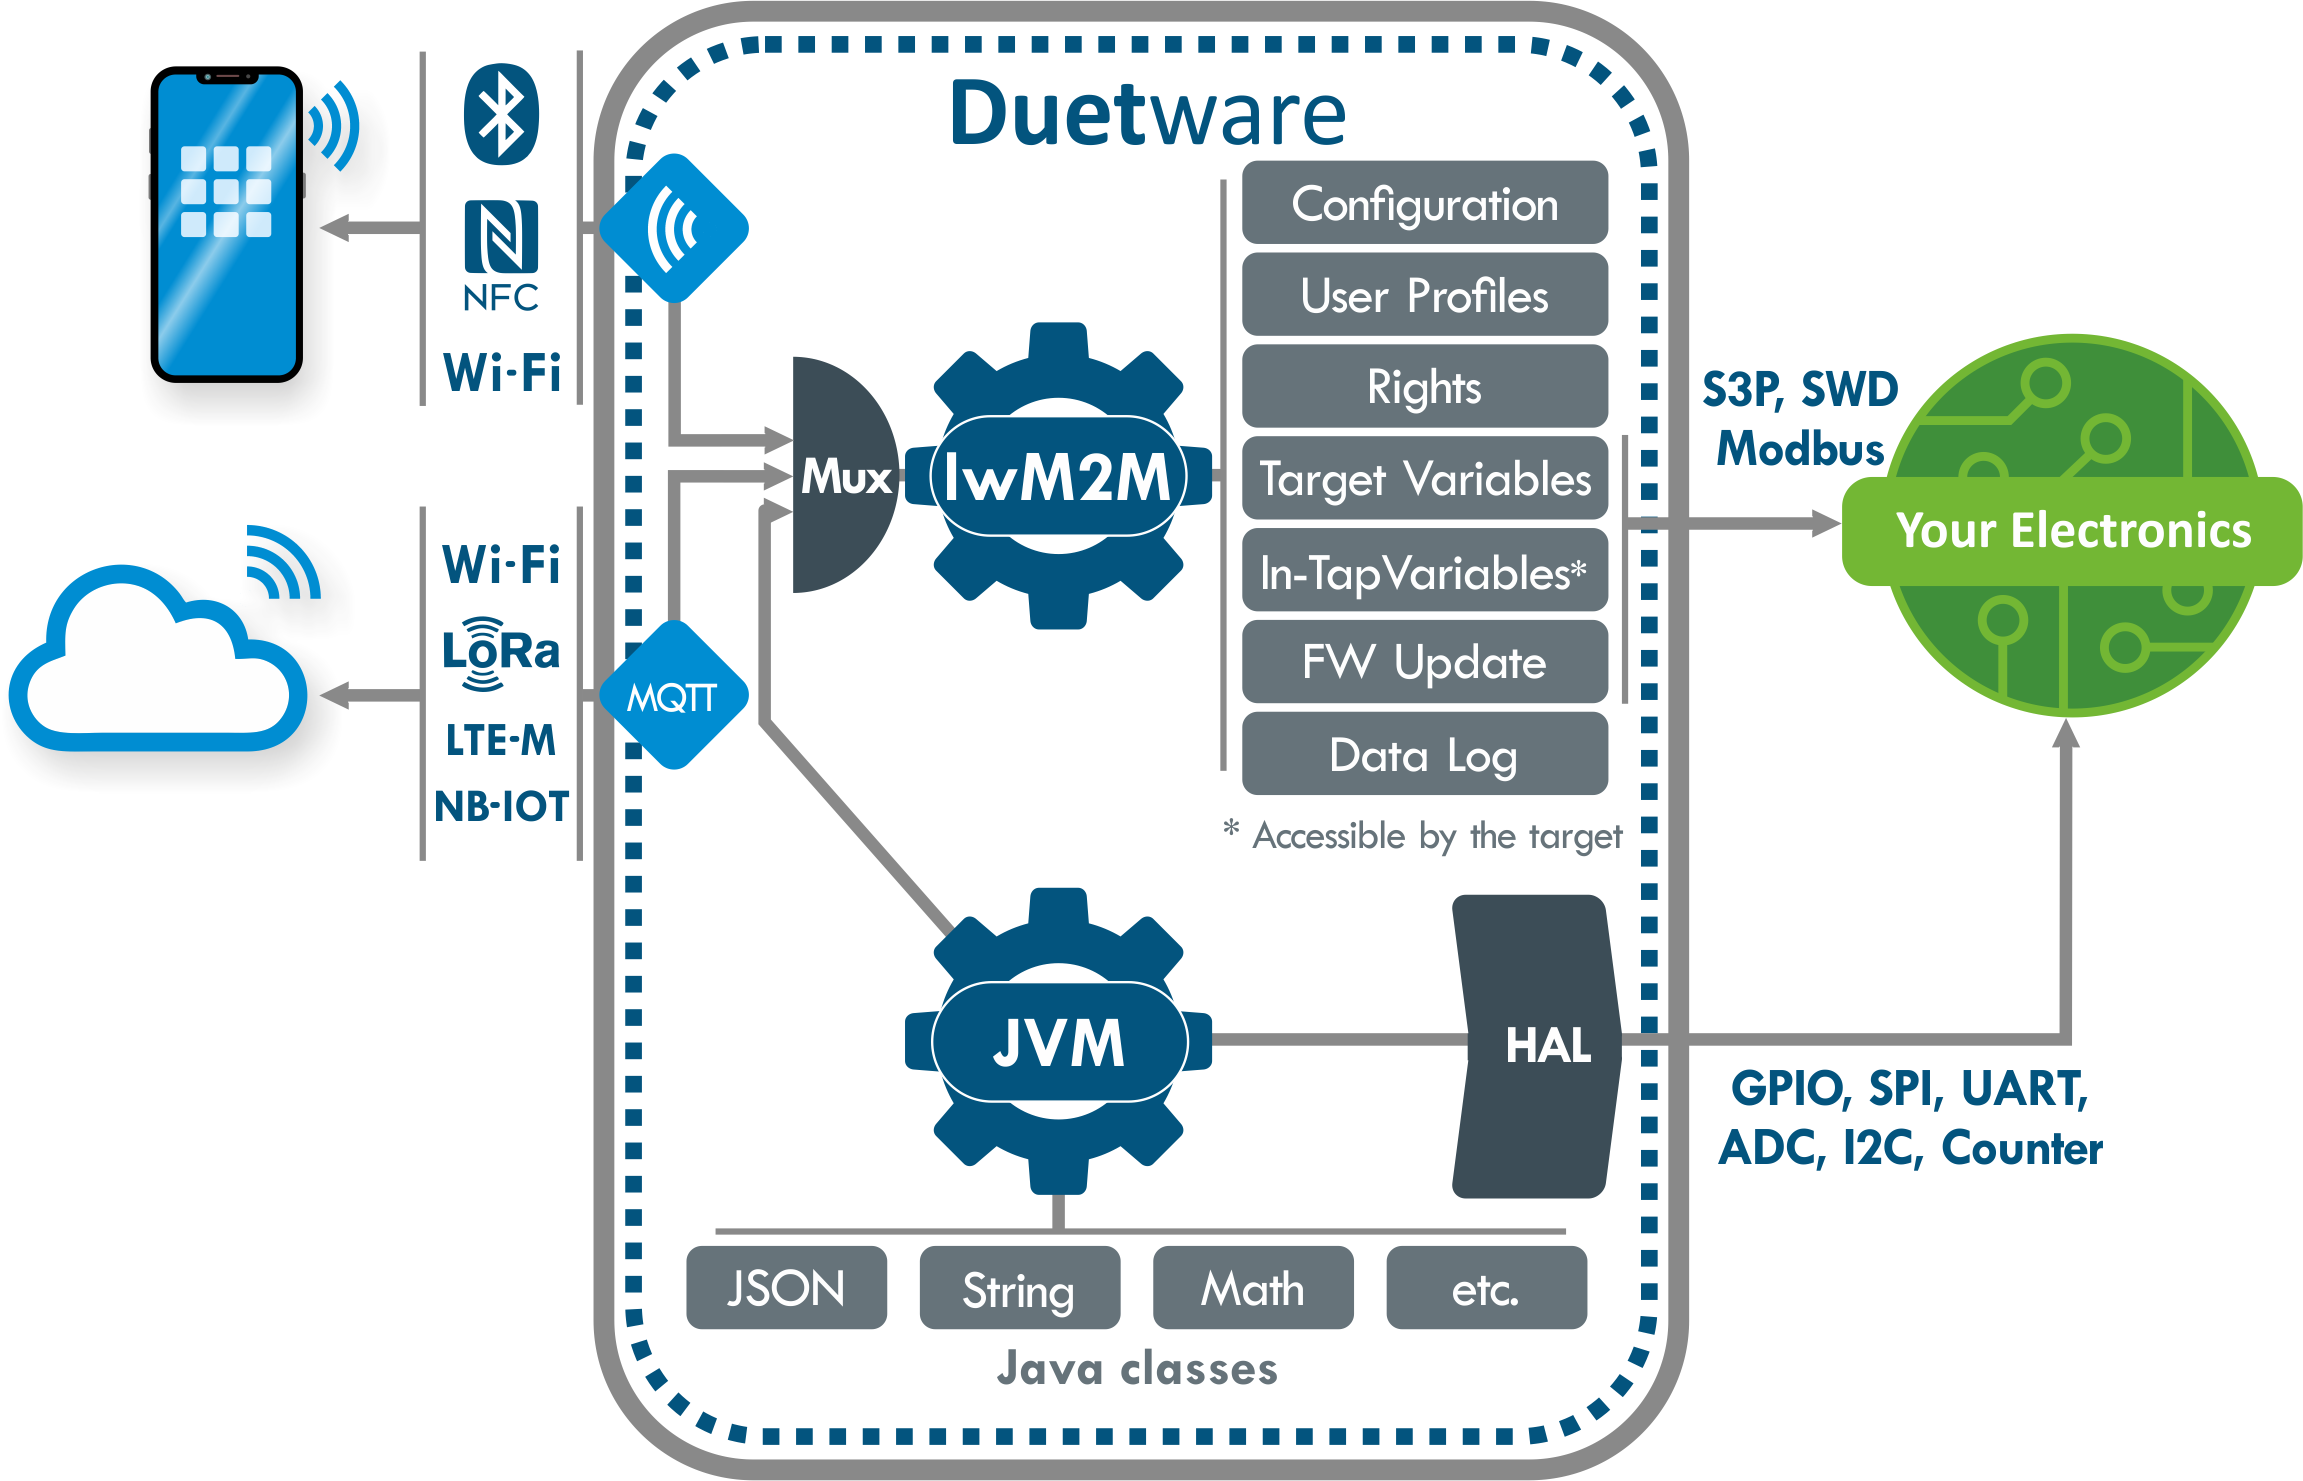 IoTize Embedded Duetware features